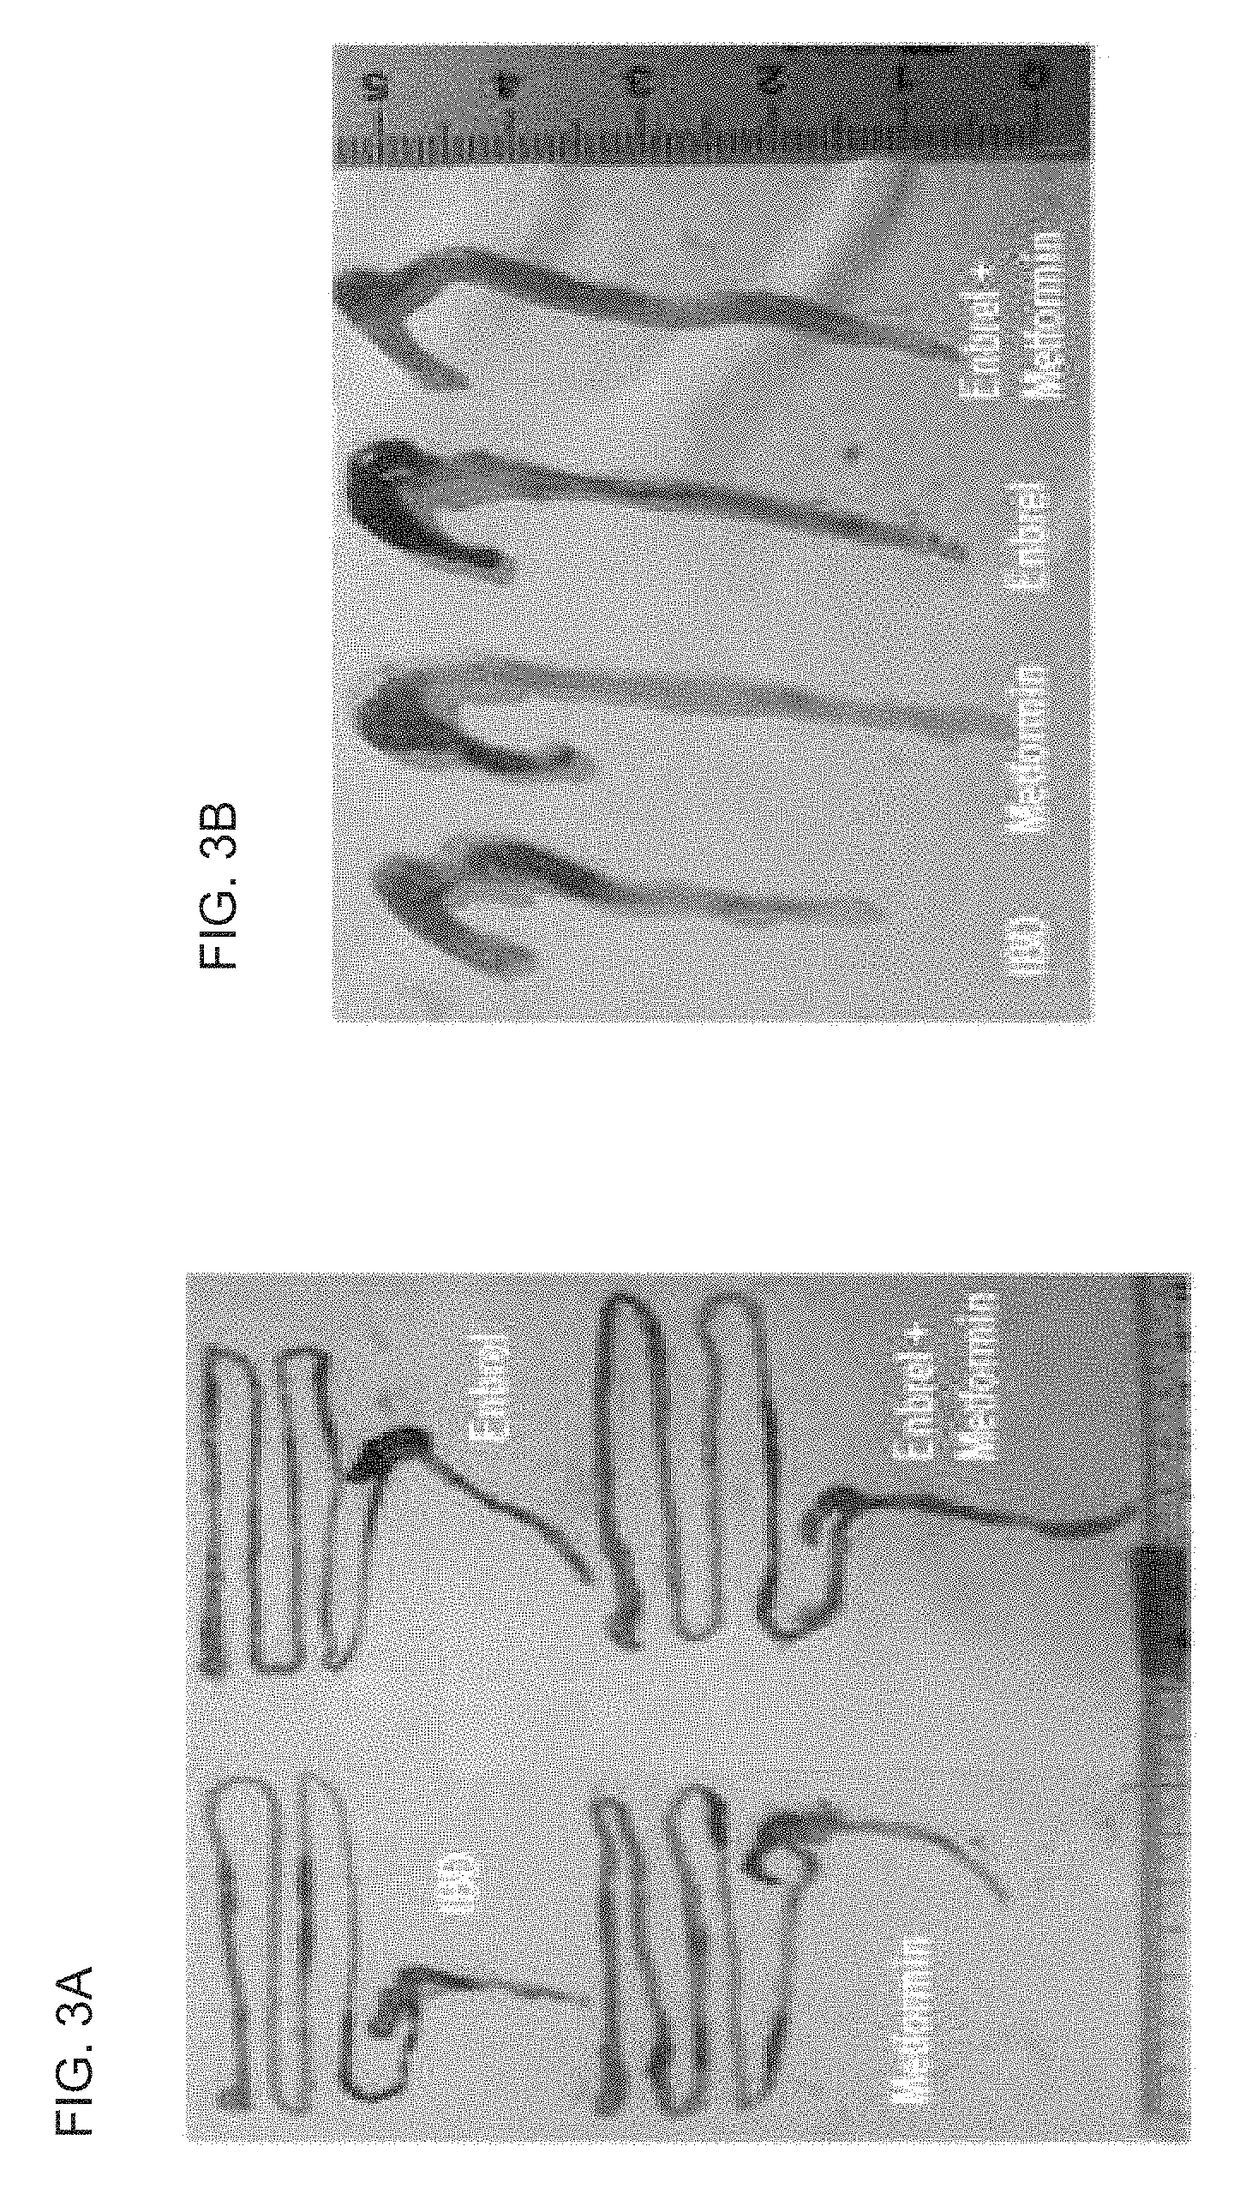 Composition comprising metformin as active ingredient for preventing or treating inflammatory bowel disease